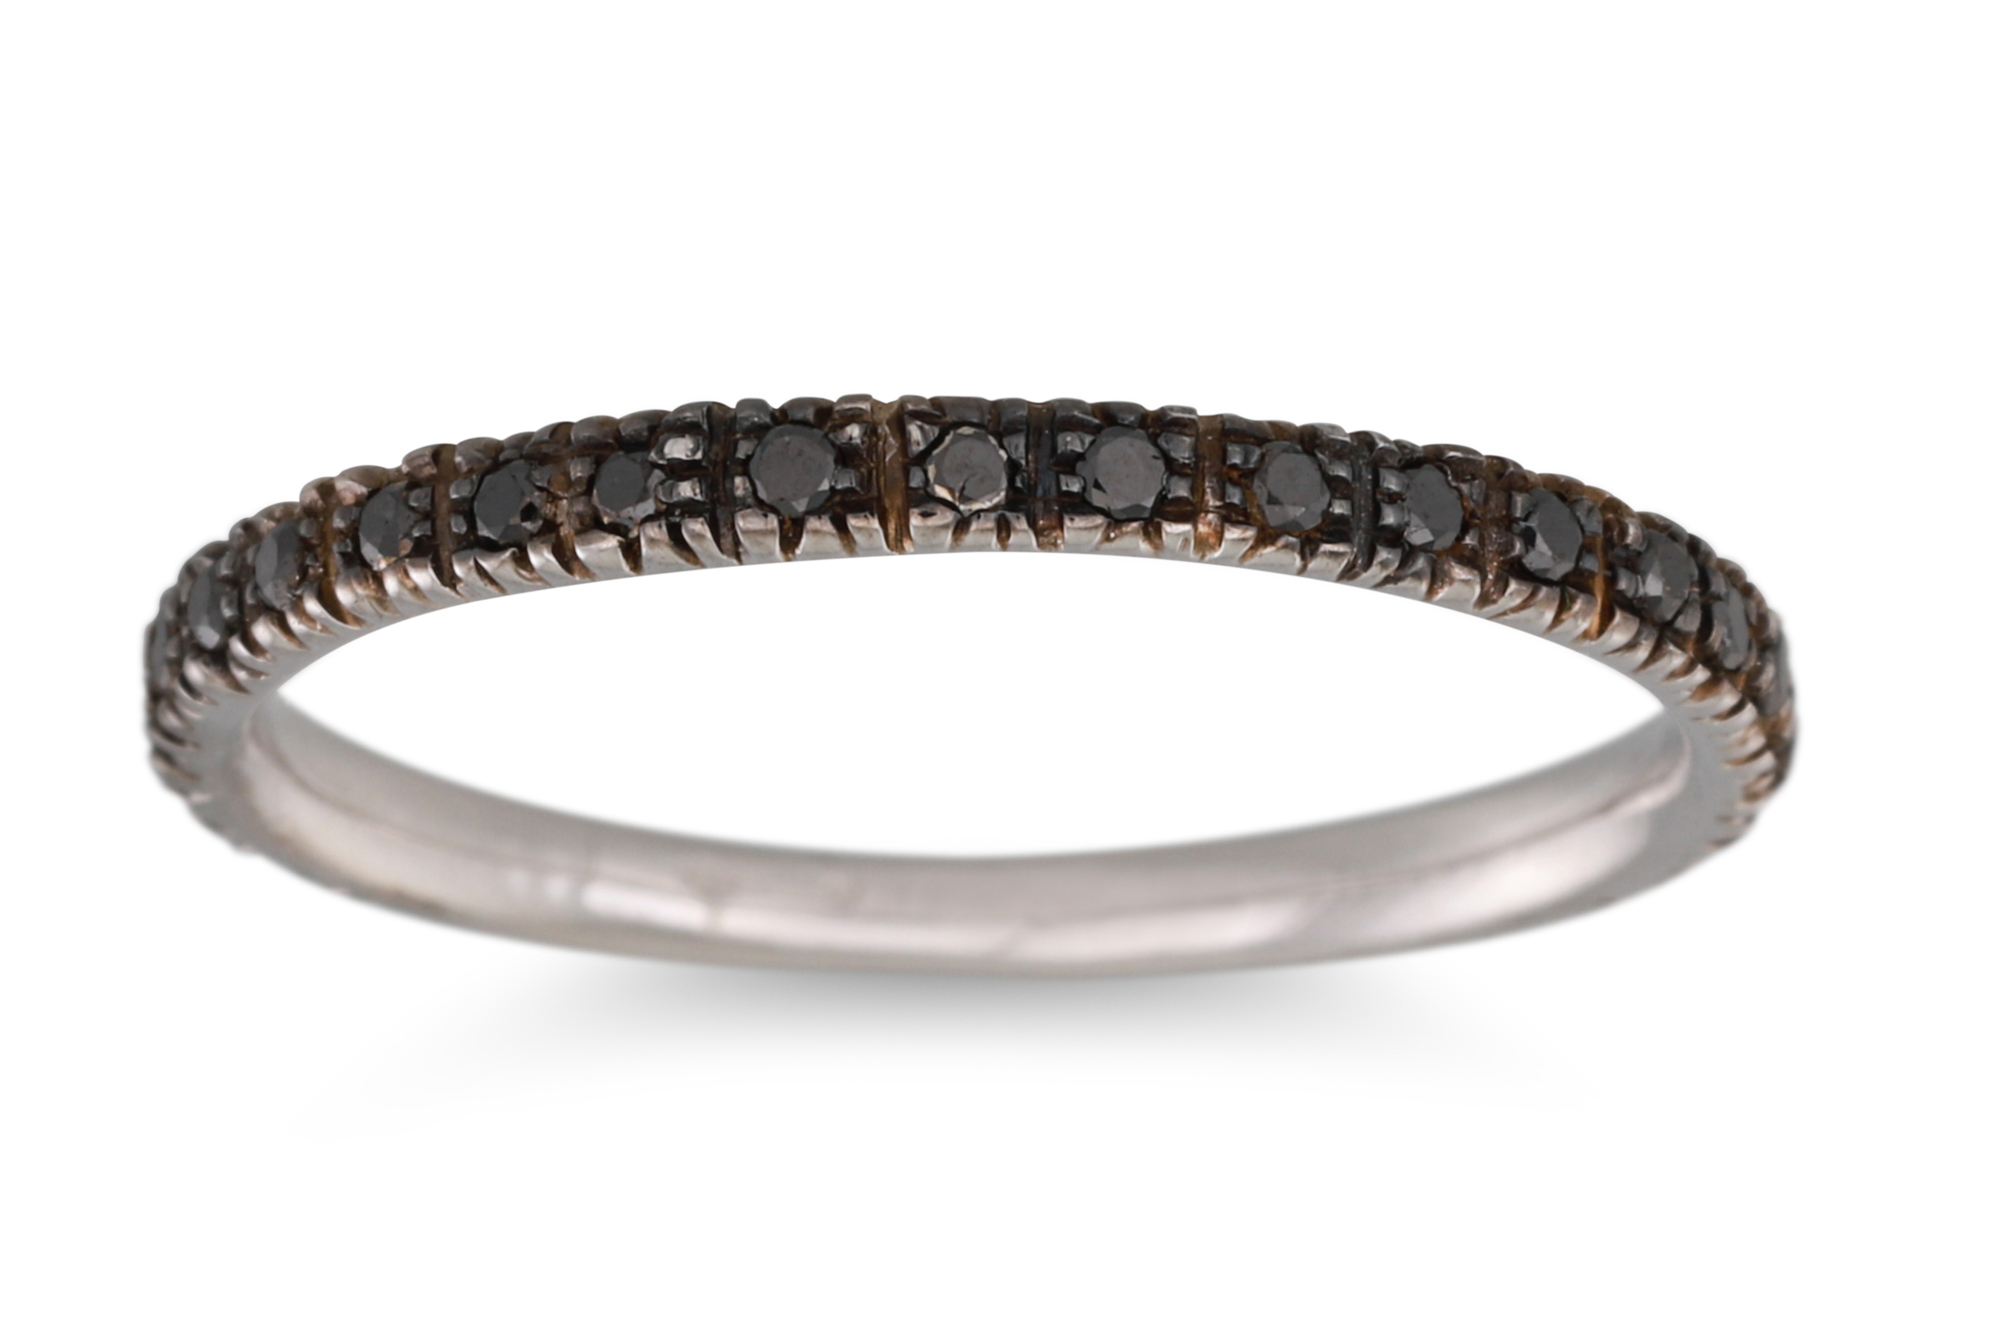 A BLACK DIAMOND SET ETERNITY RING, mounted in 18ct white gold, size L - M